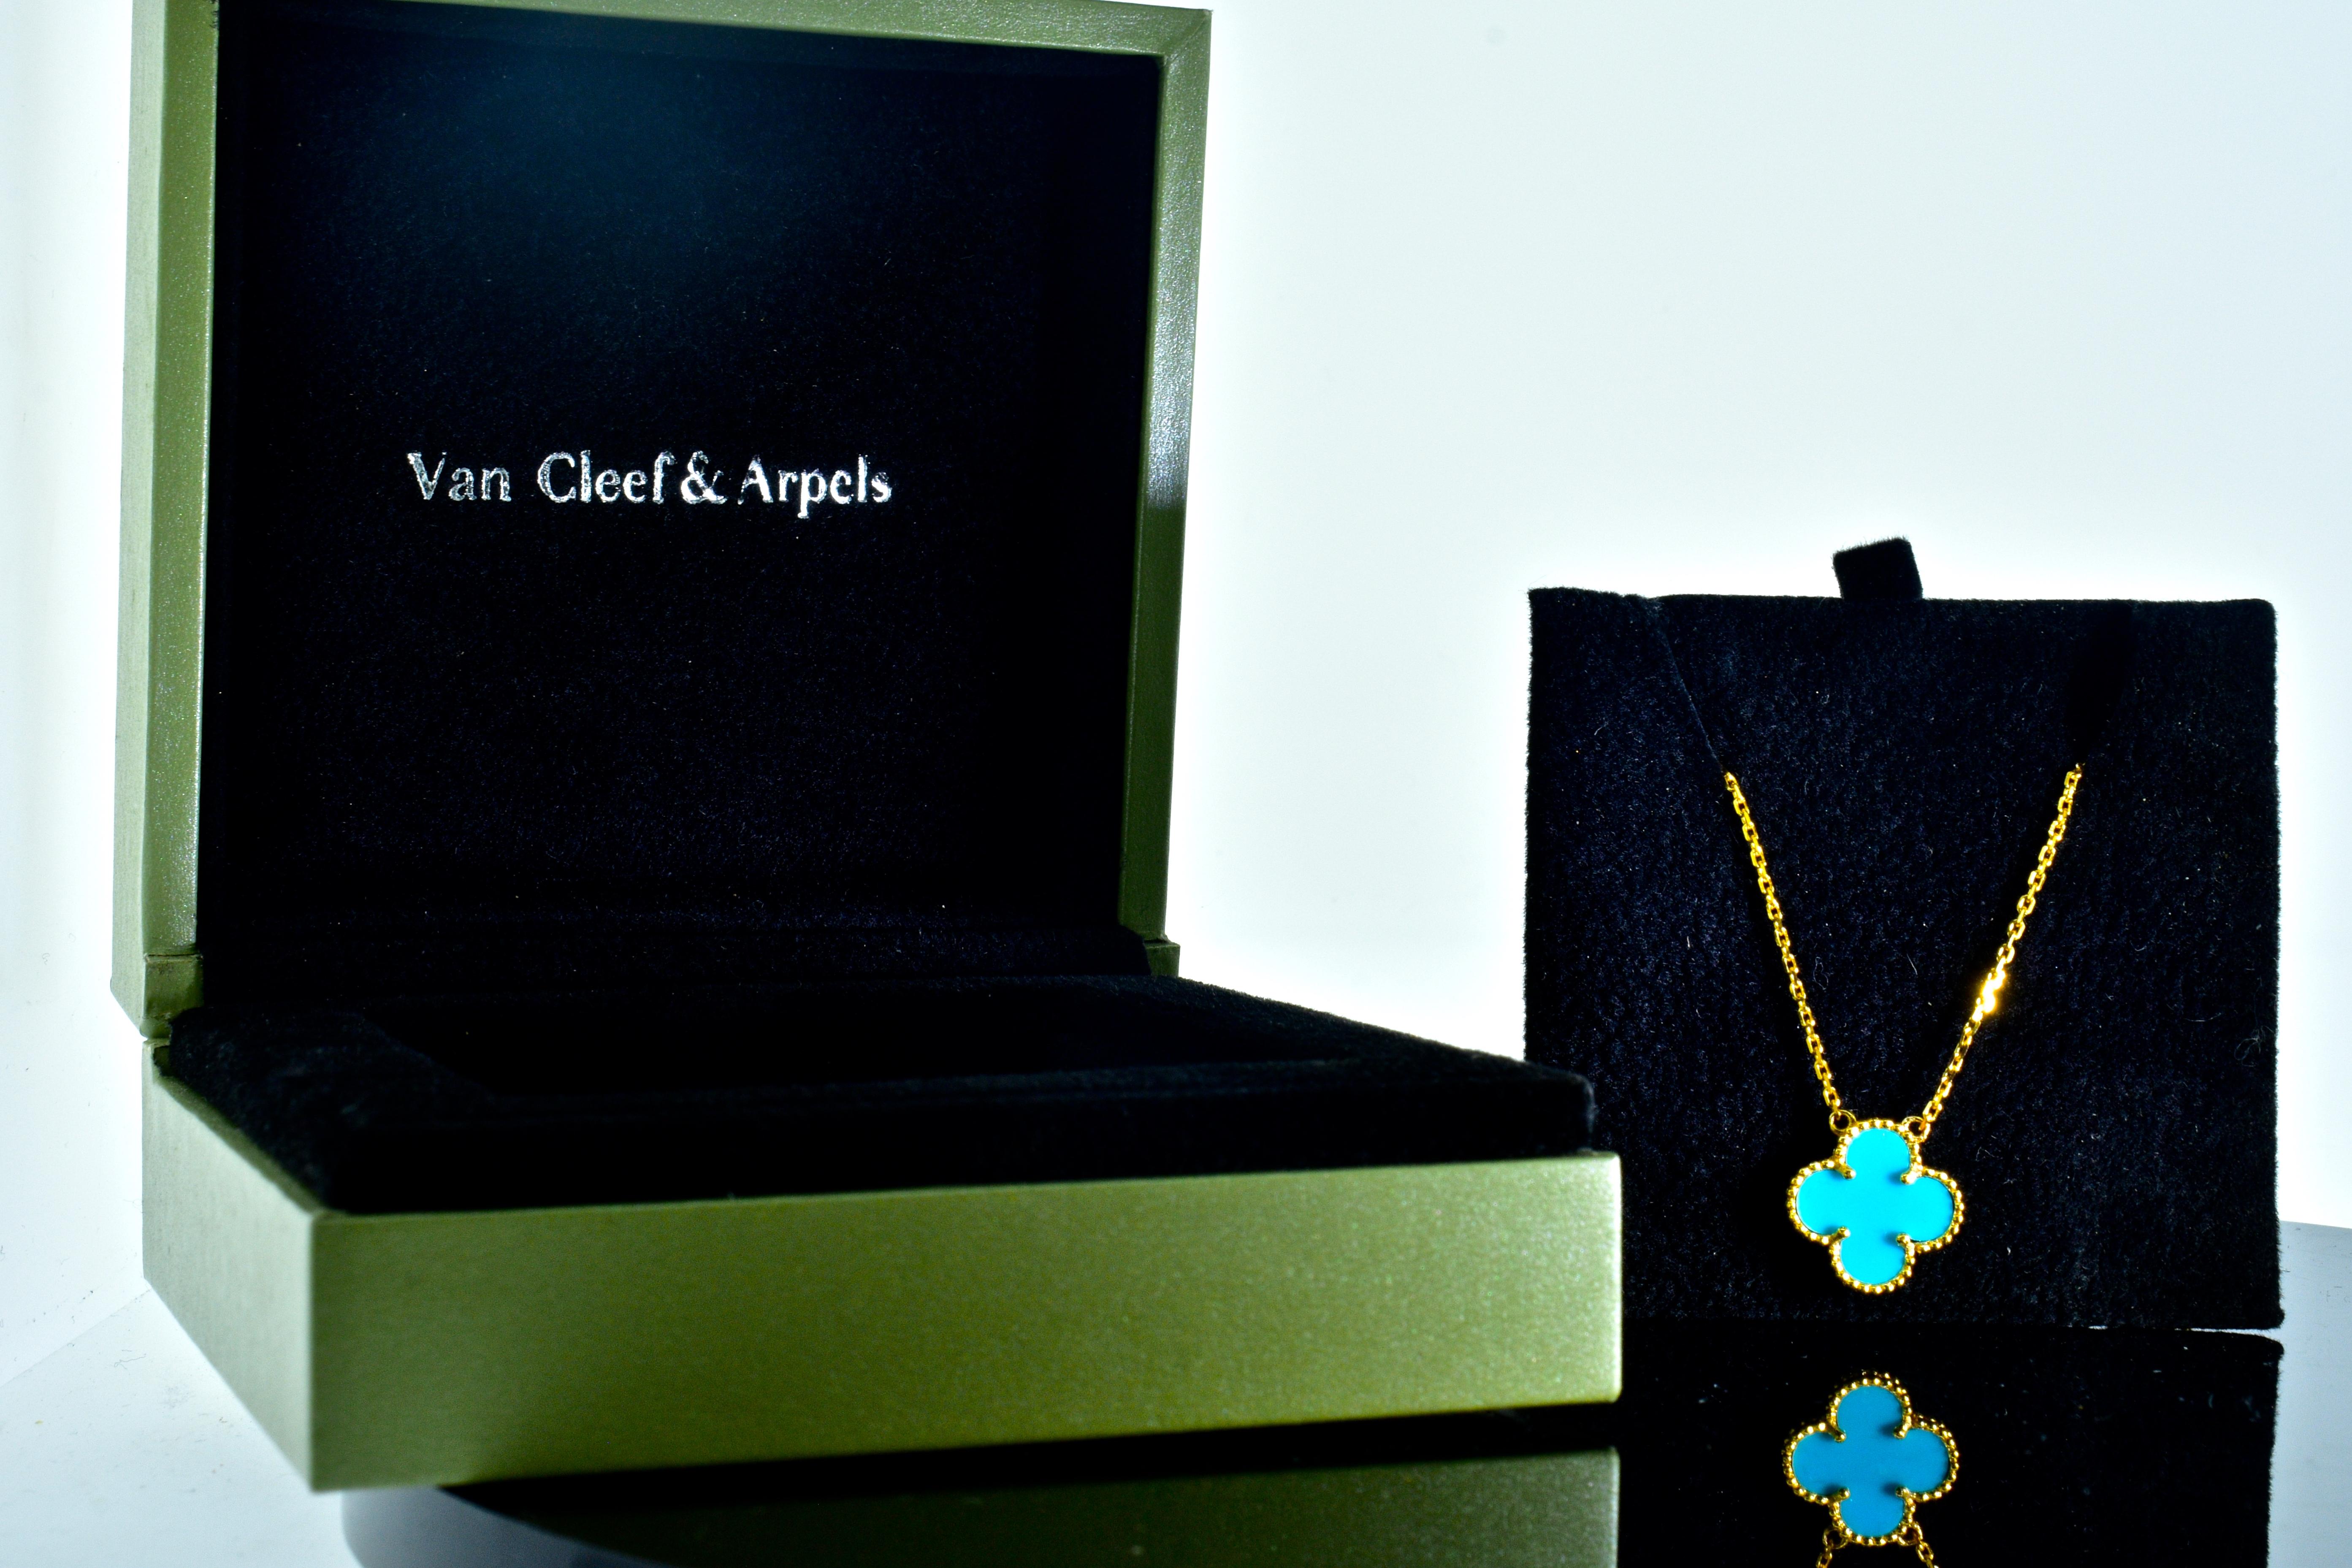 Van Cleef & Arpels Alhambra turquoise single pendant in 18K gold.  The pendant is 5/8th inches and on the original chain which can be worn at 17 inches and slightly shorter at 16 inches.  This vintage piece is signed VC&A (for Van Cleef & Arpels),